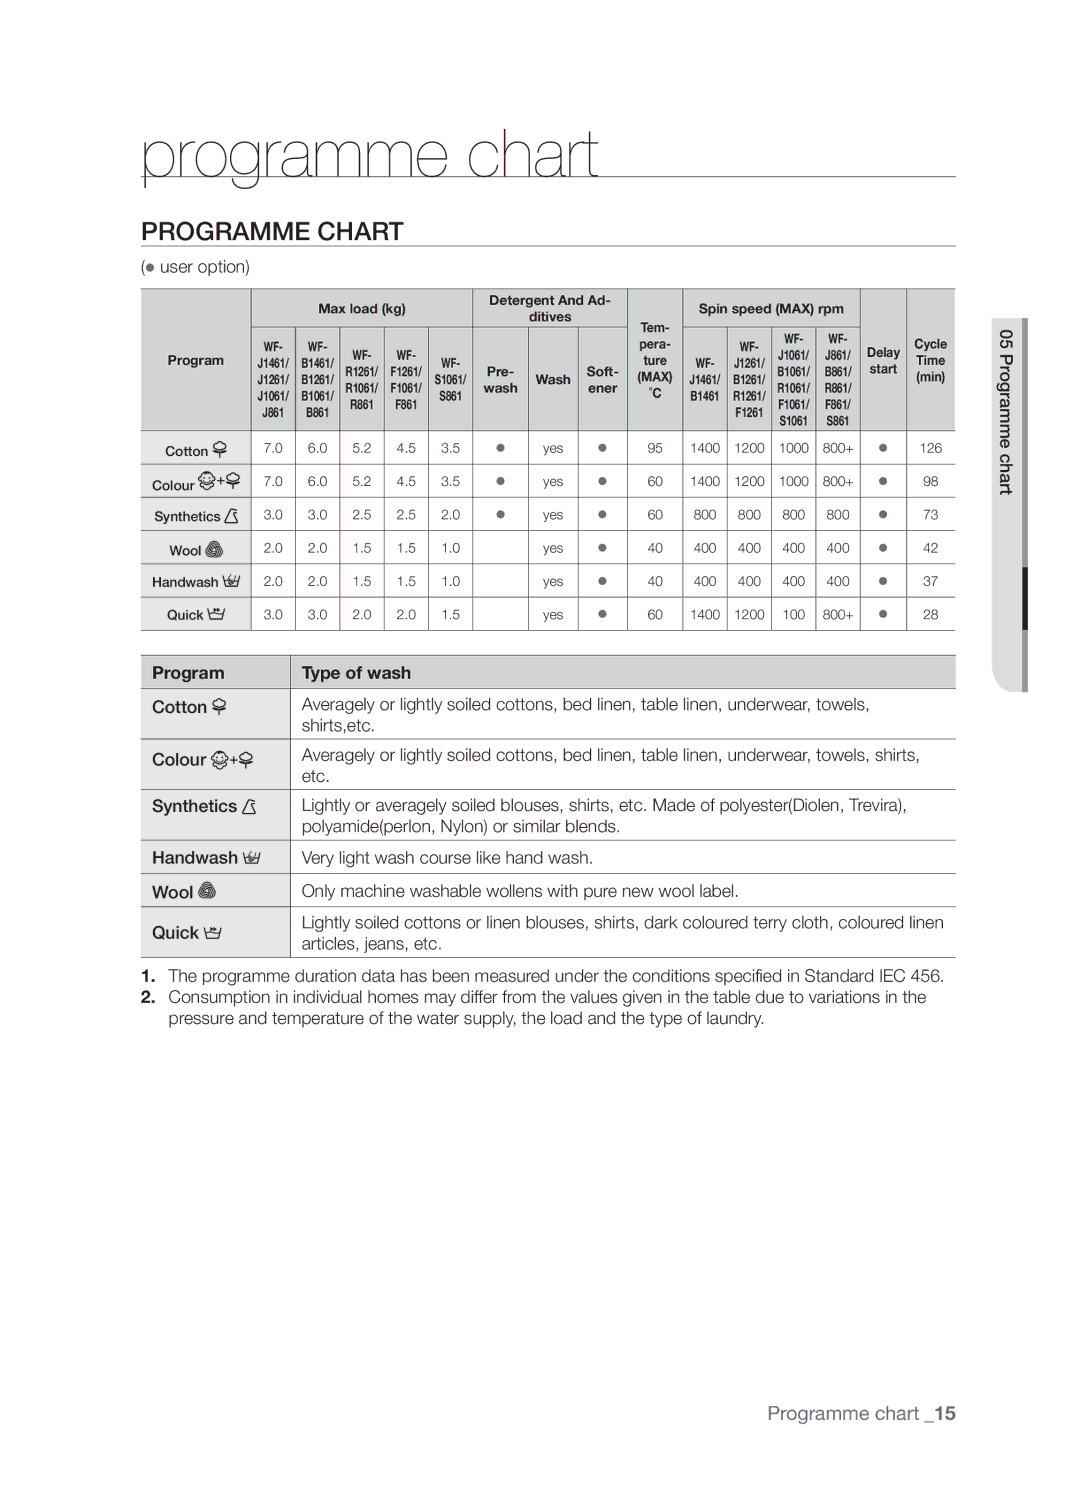 Samsung WF-B1061GW/XEO, WF-B1061/YLR, WF-B1061GW/XEH, WF-B1061GW/YLE Programme chart, Programme Chart, Program Type of wash 